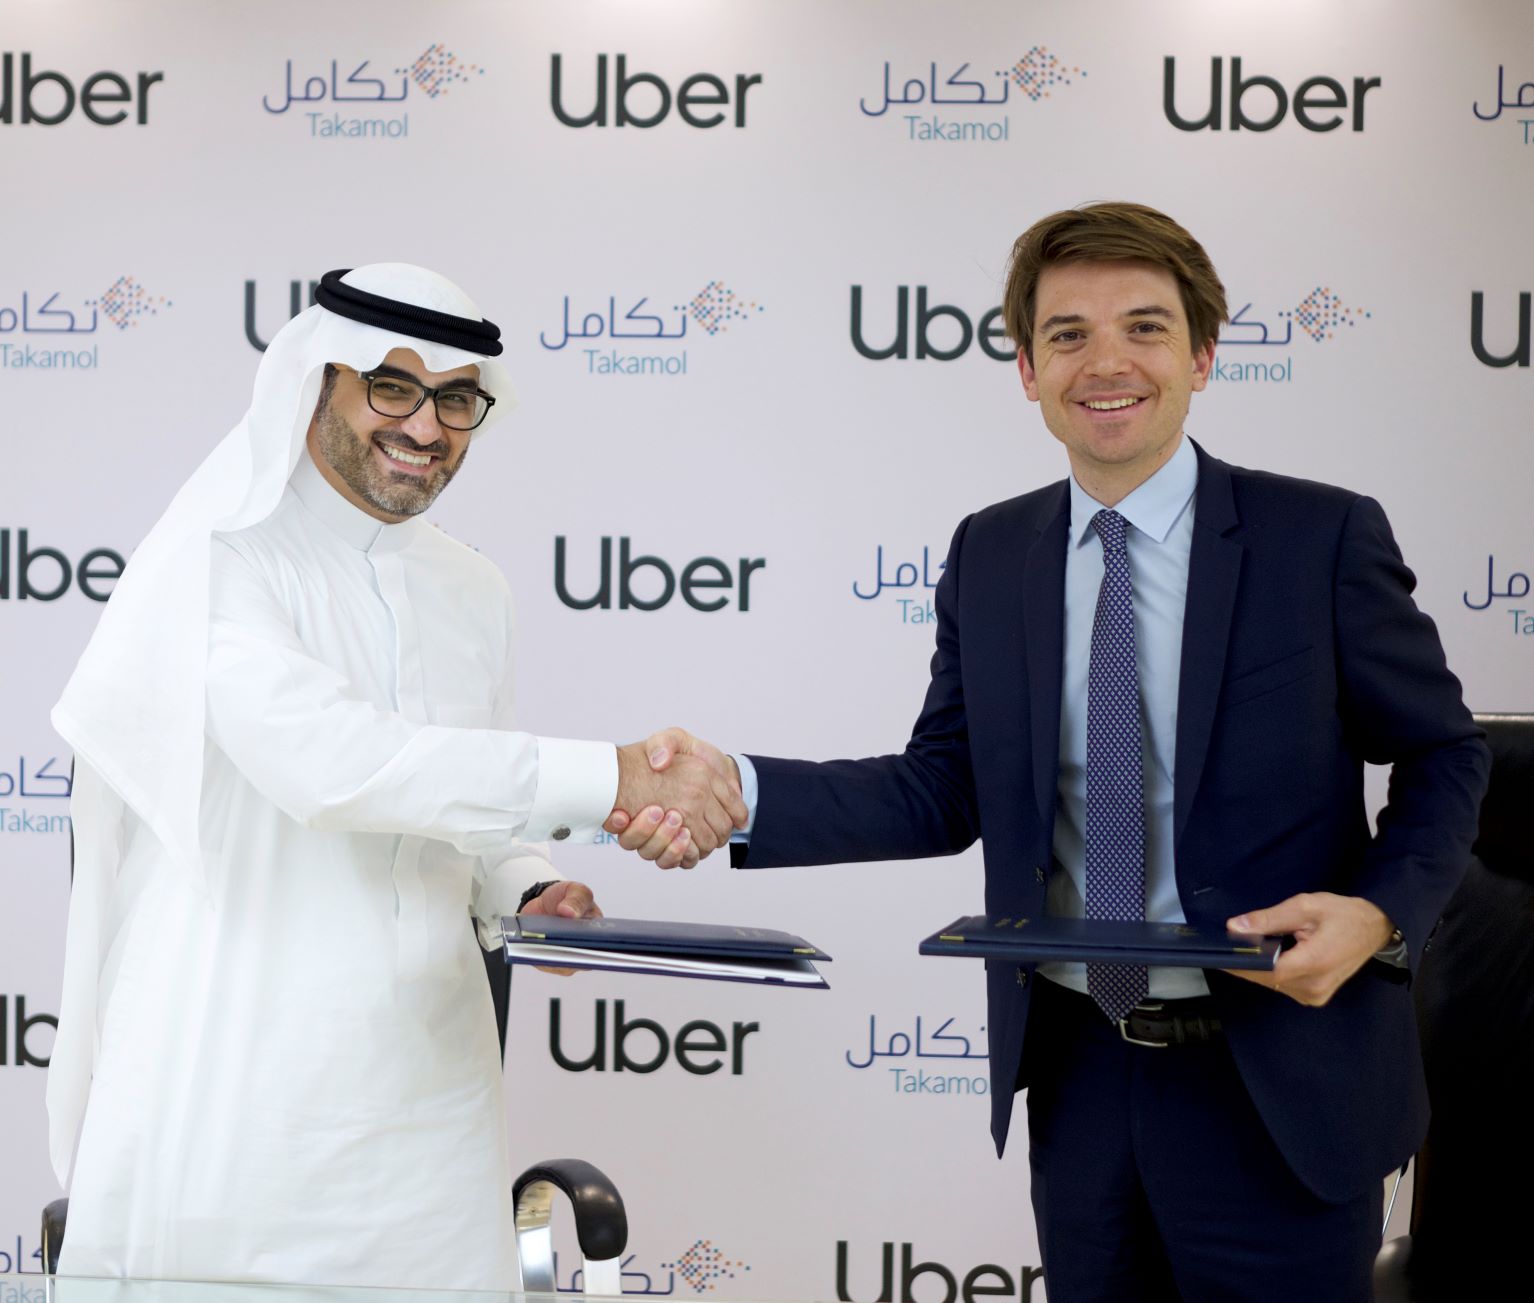 Uber Teams up with Takamol to Provide Saudi Women with Access to Affordable Transport